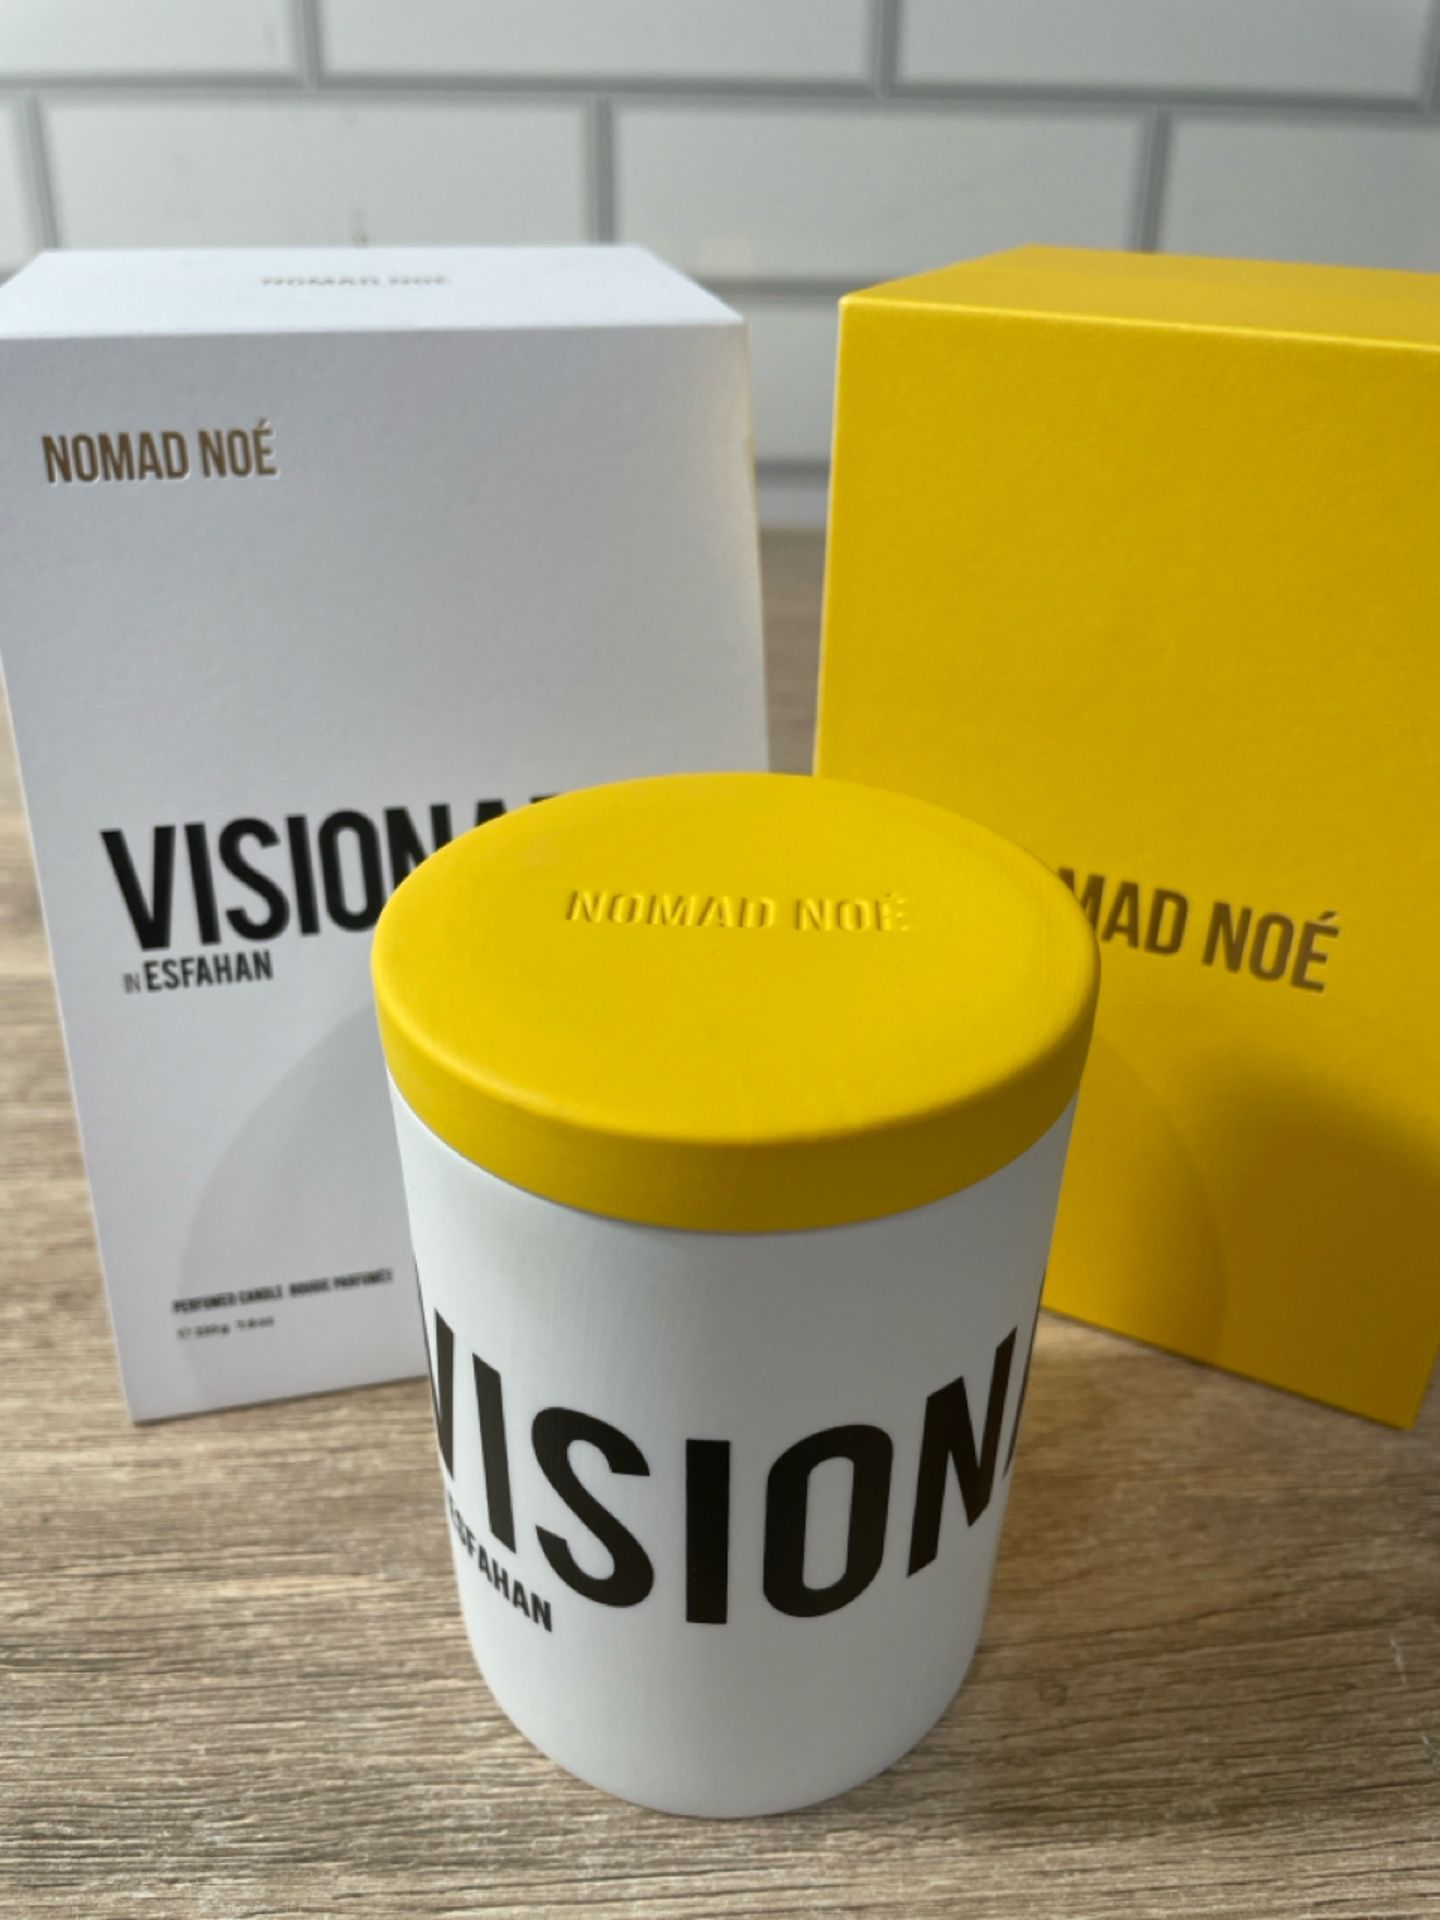 Visionary Scented Candle from Nomad Noe - Image 4 of 4